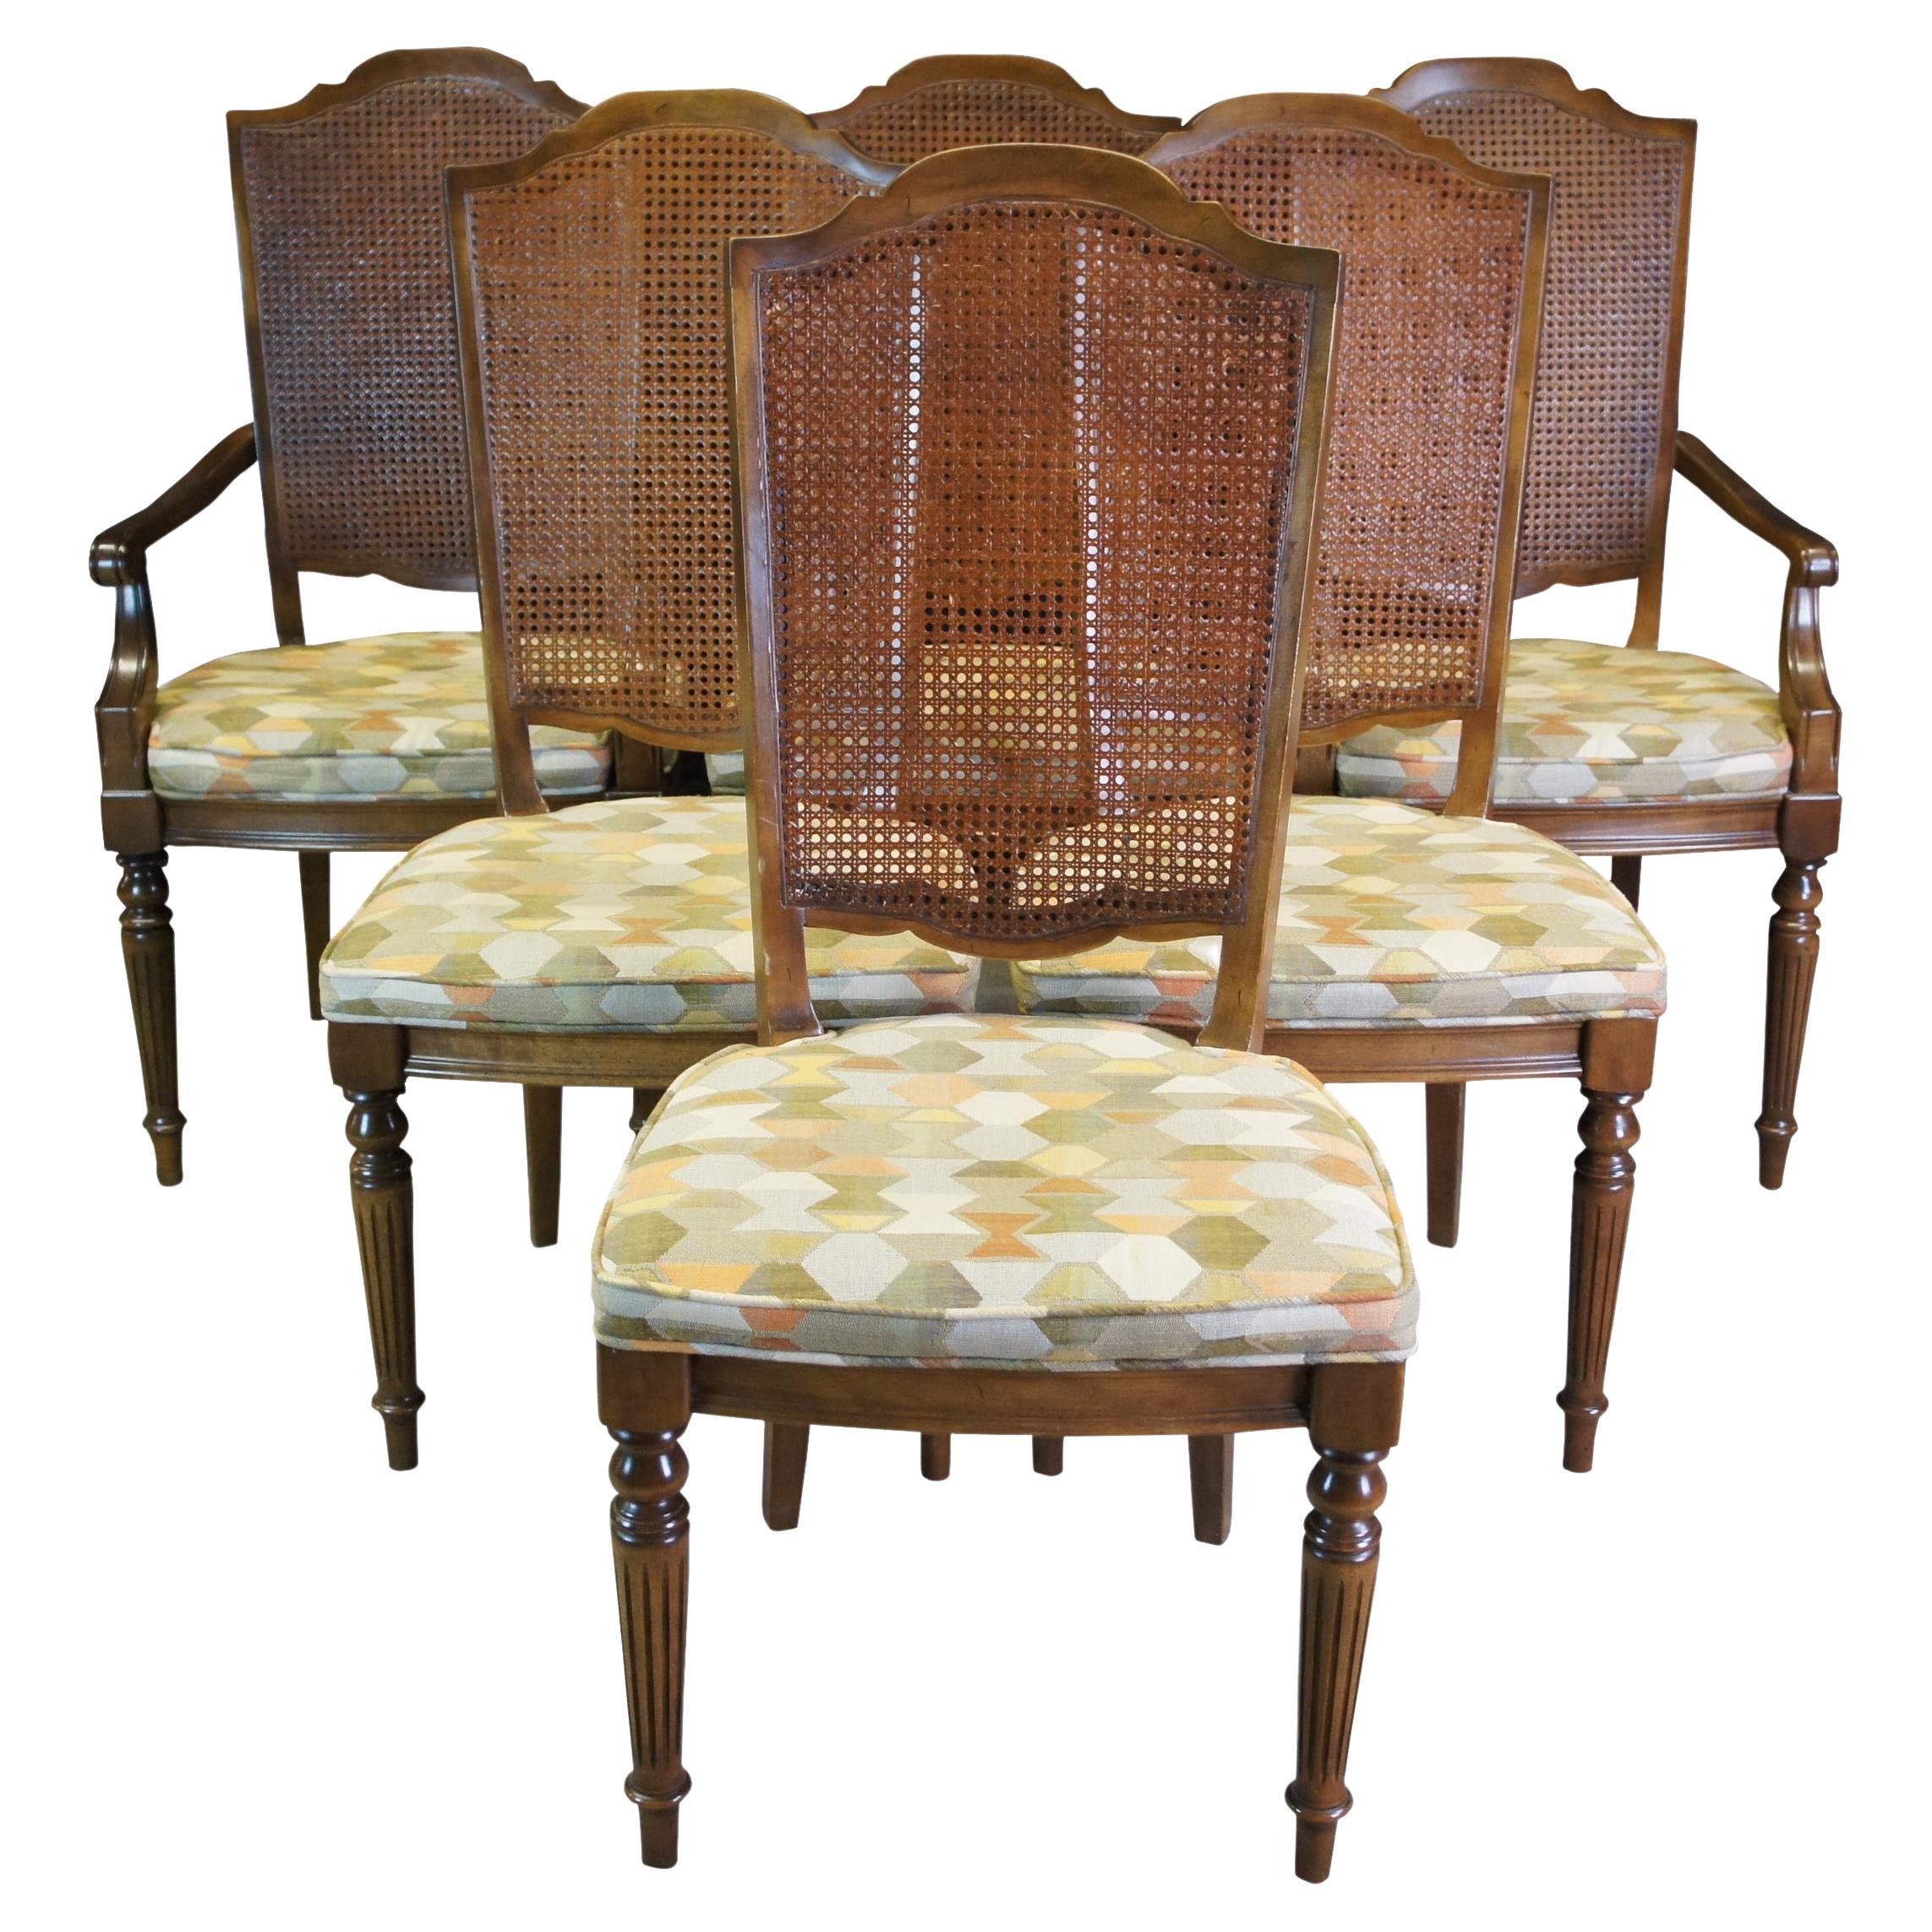 6 Ethan Allen Classic Manor Maple Caned Dining Chairs French Country Vtg 15-6012